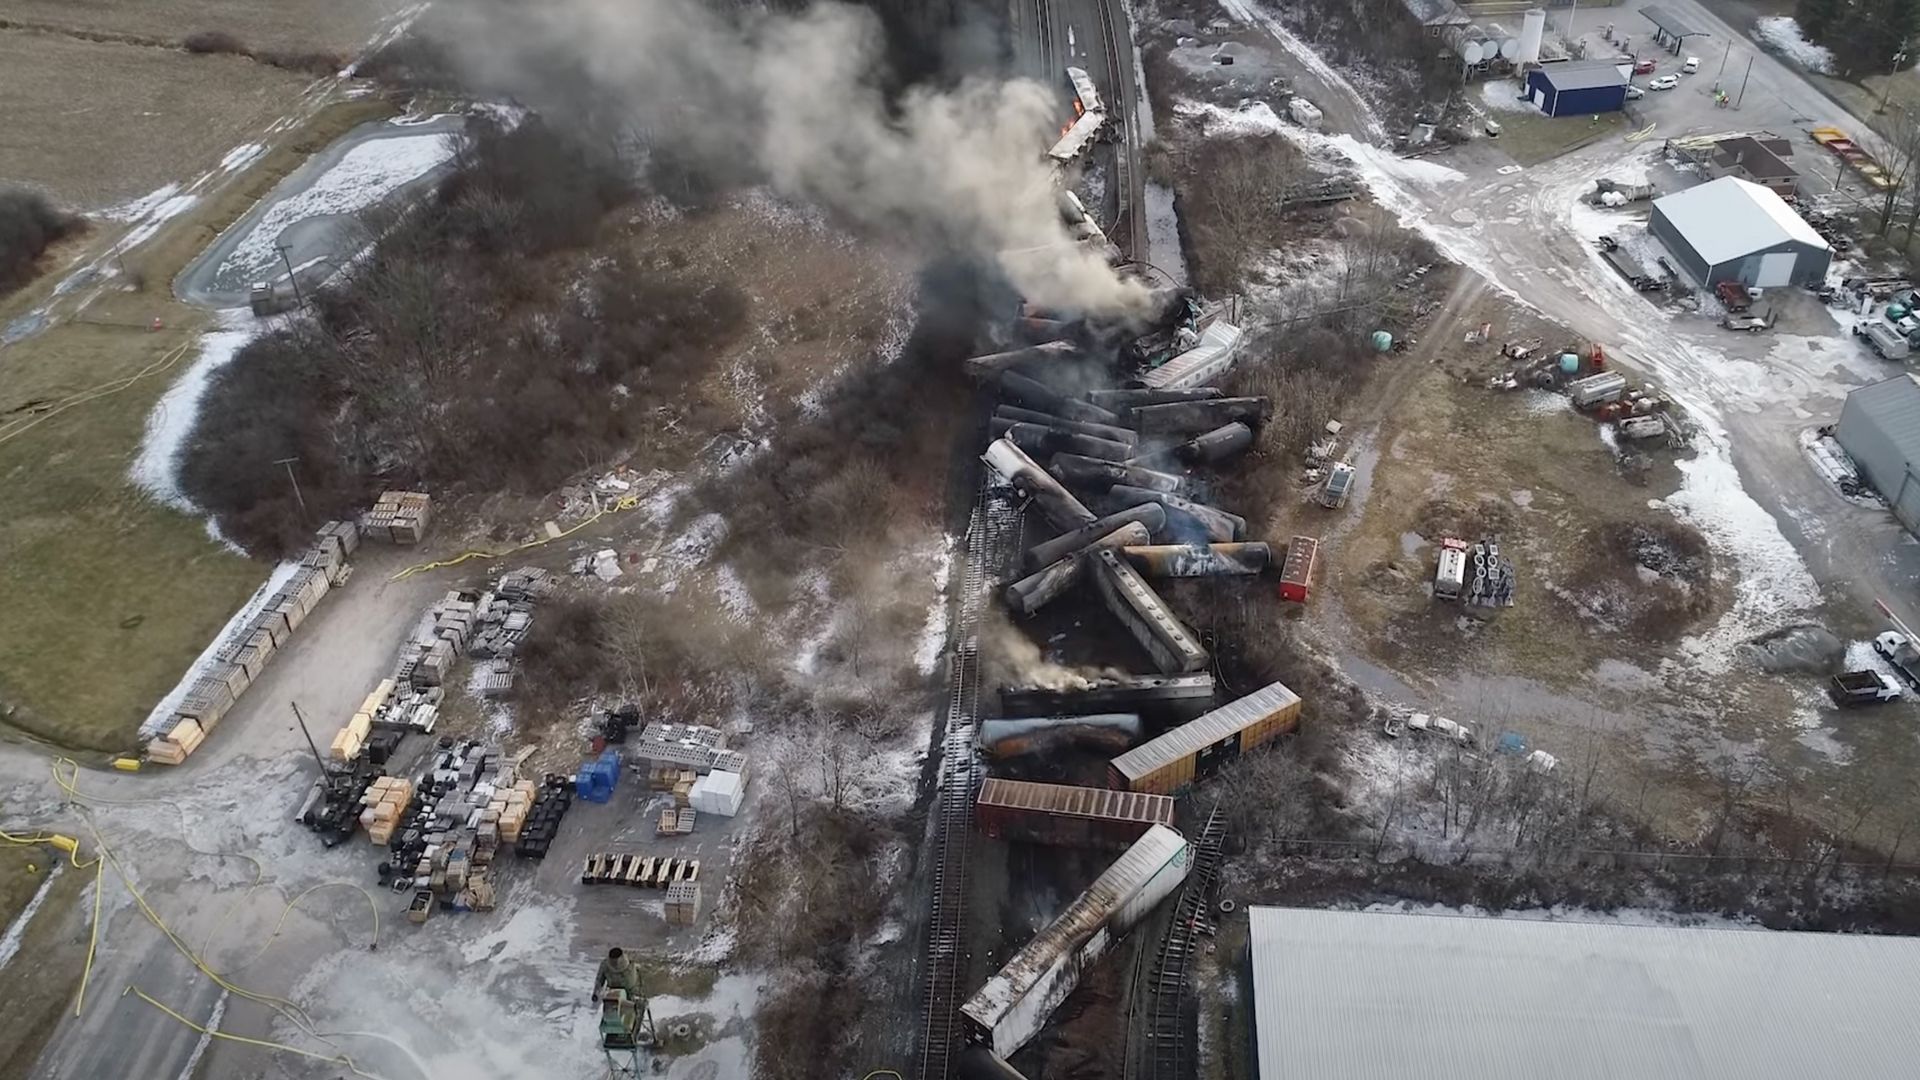 Aerial photo of the site of the derailed freight train, showing smoke billowing from a pile of collapsed train cars